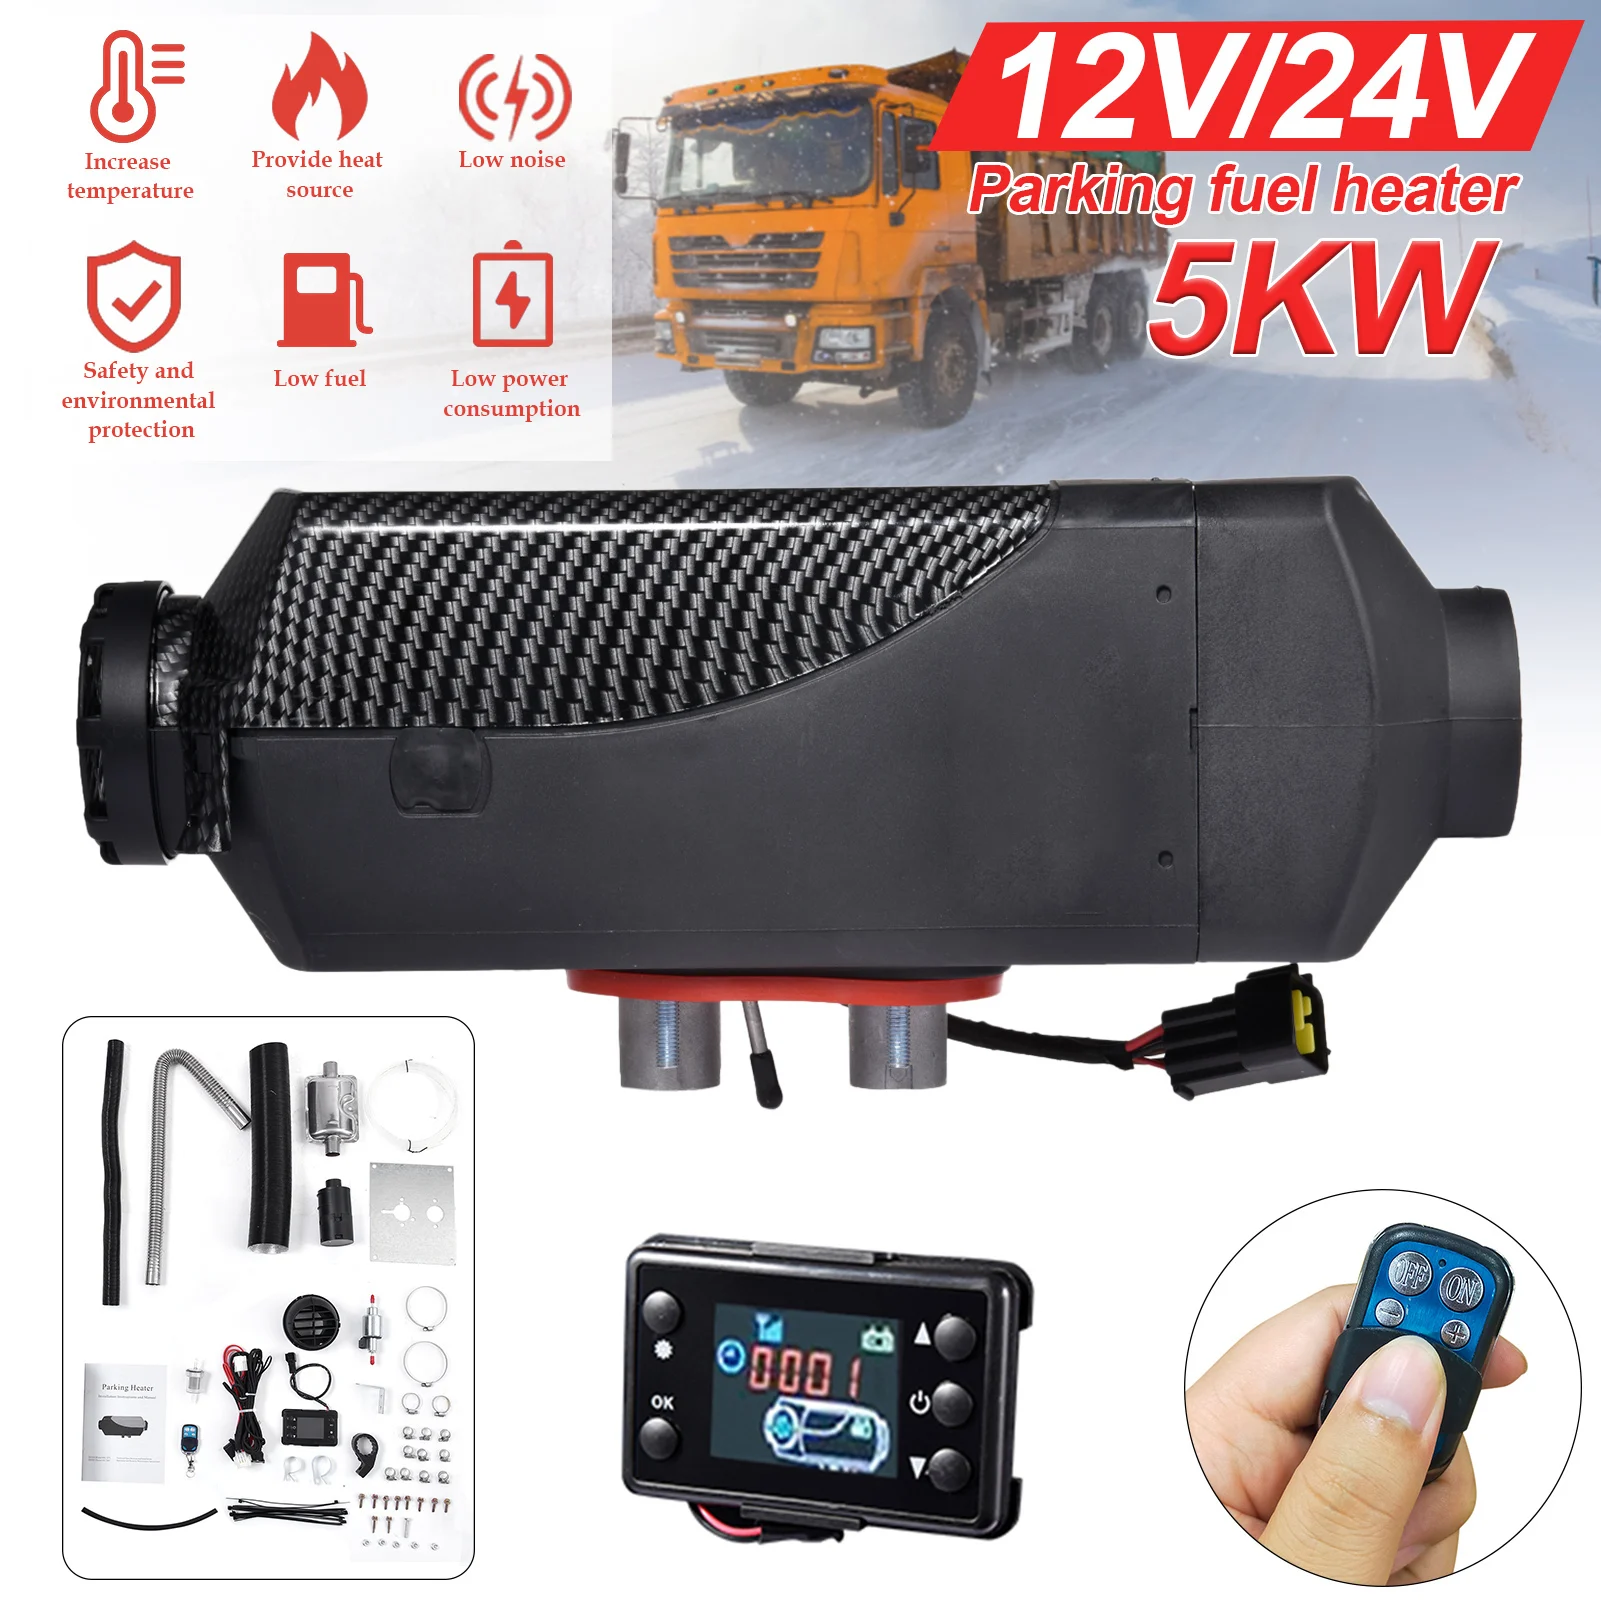 

12V/24V 5KW Car Air Heater Compact Automatic Fuel Heater For Vehicle Yacht Boat Heater LCD Switch Parking Heater